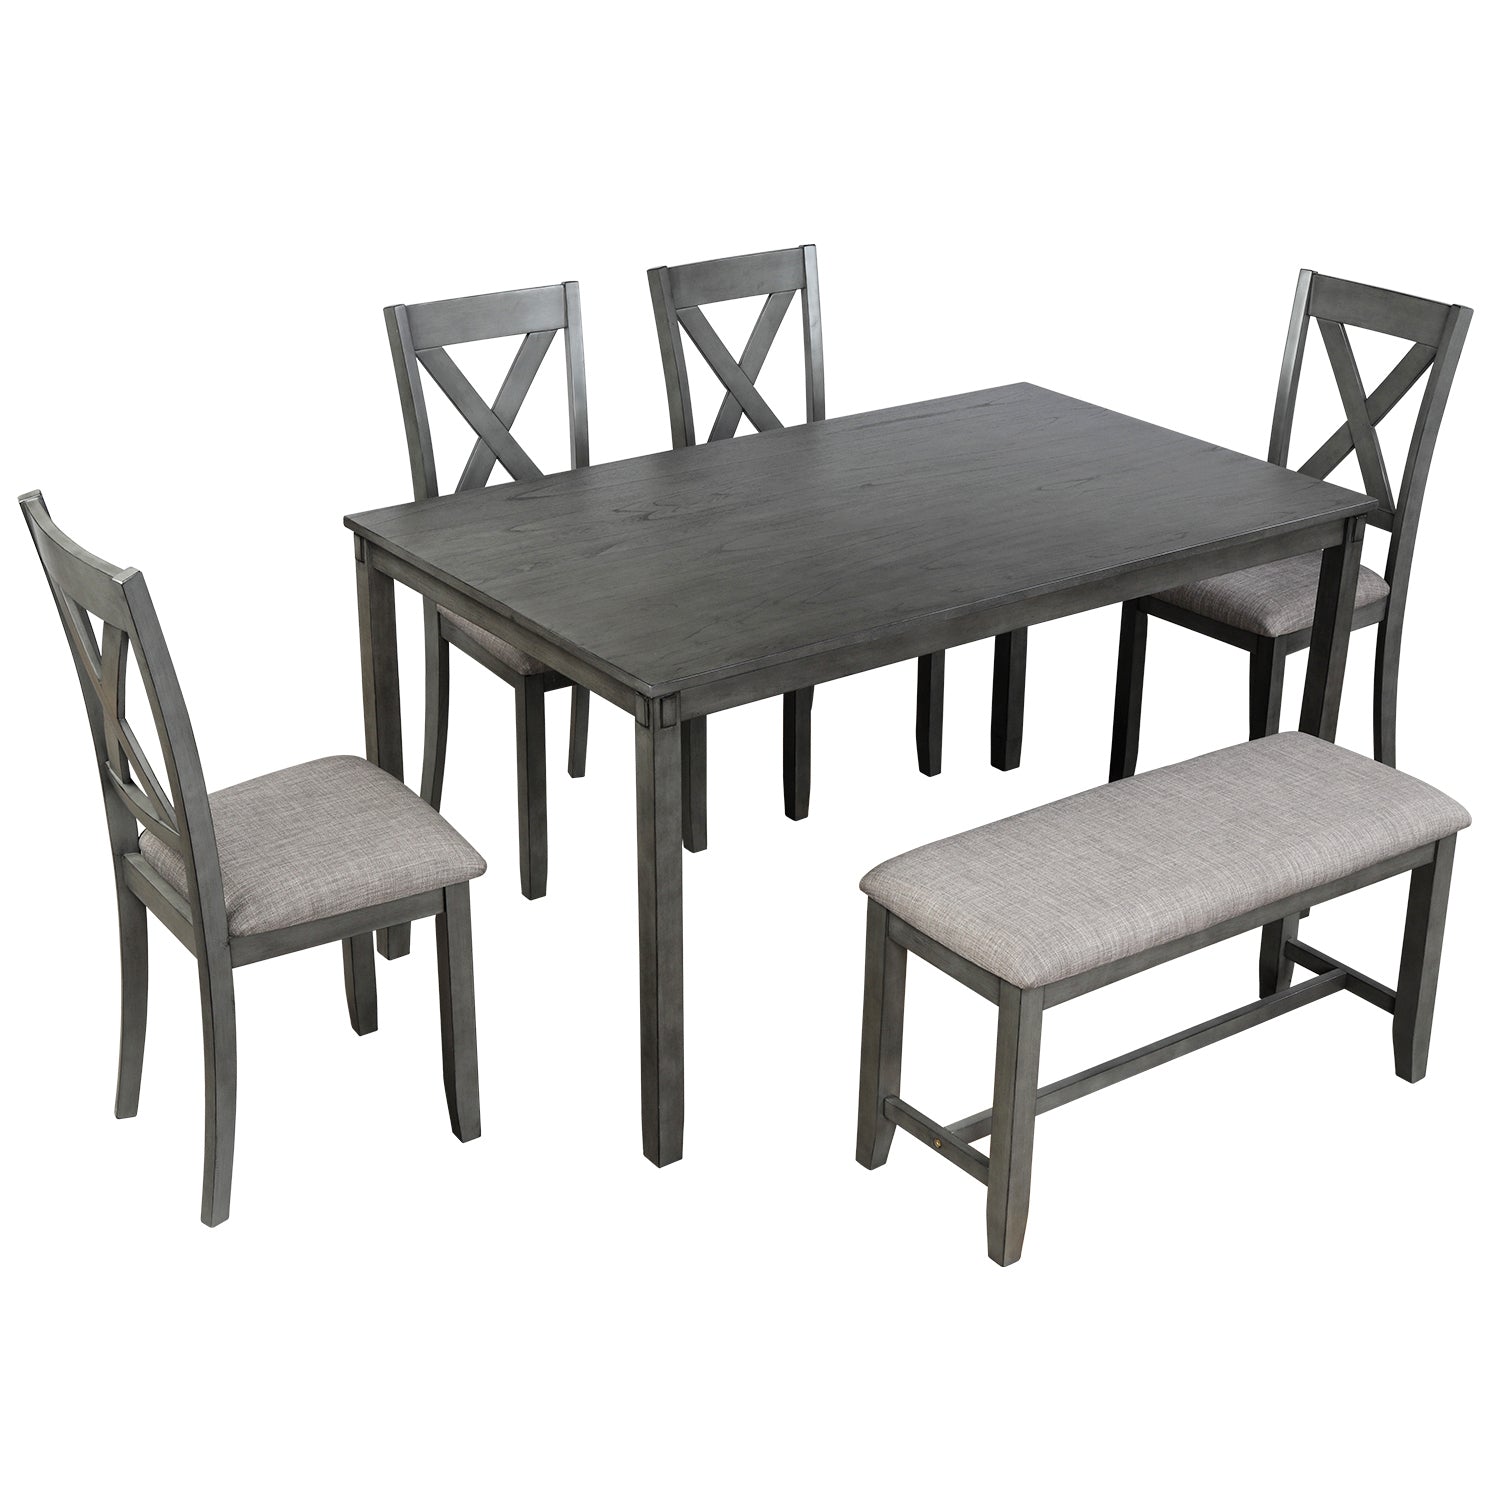 TREXM 6-Piece Set Dining Table, 4 Dining Chairs & Bench Home Furniture (Gray)